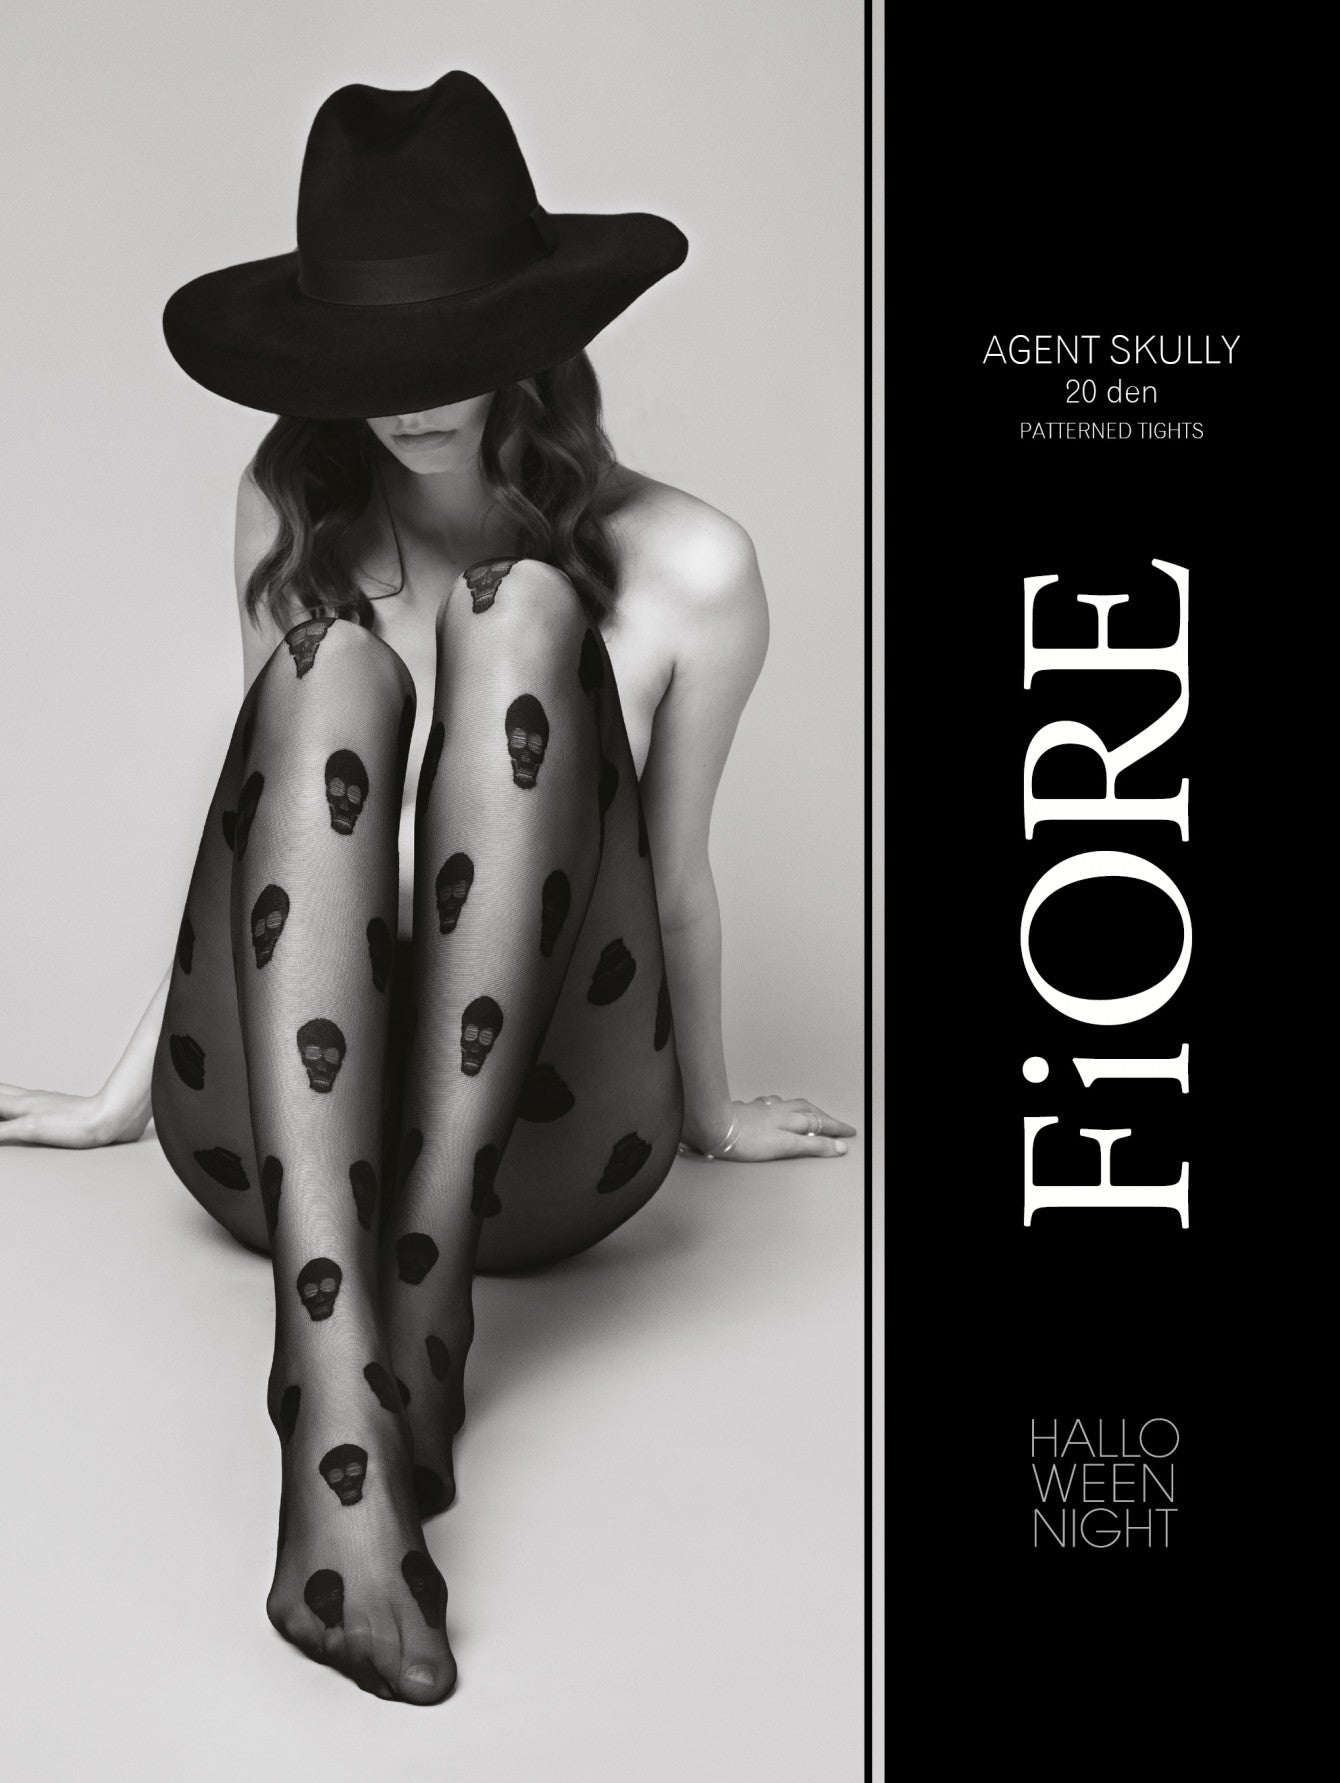 Fiore Agent Skully Tights - Sheer black fashion tights with an all over skull pattern, perfect for Halloween.